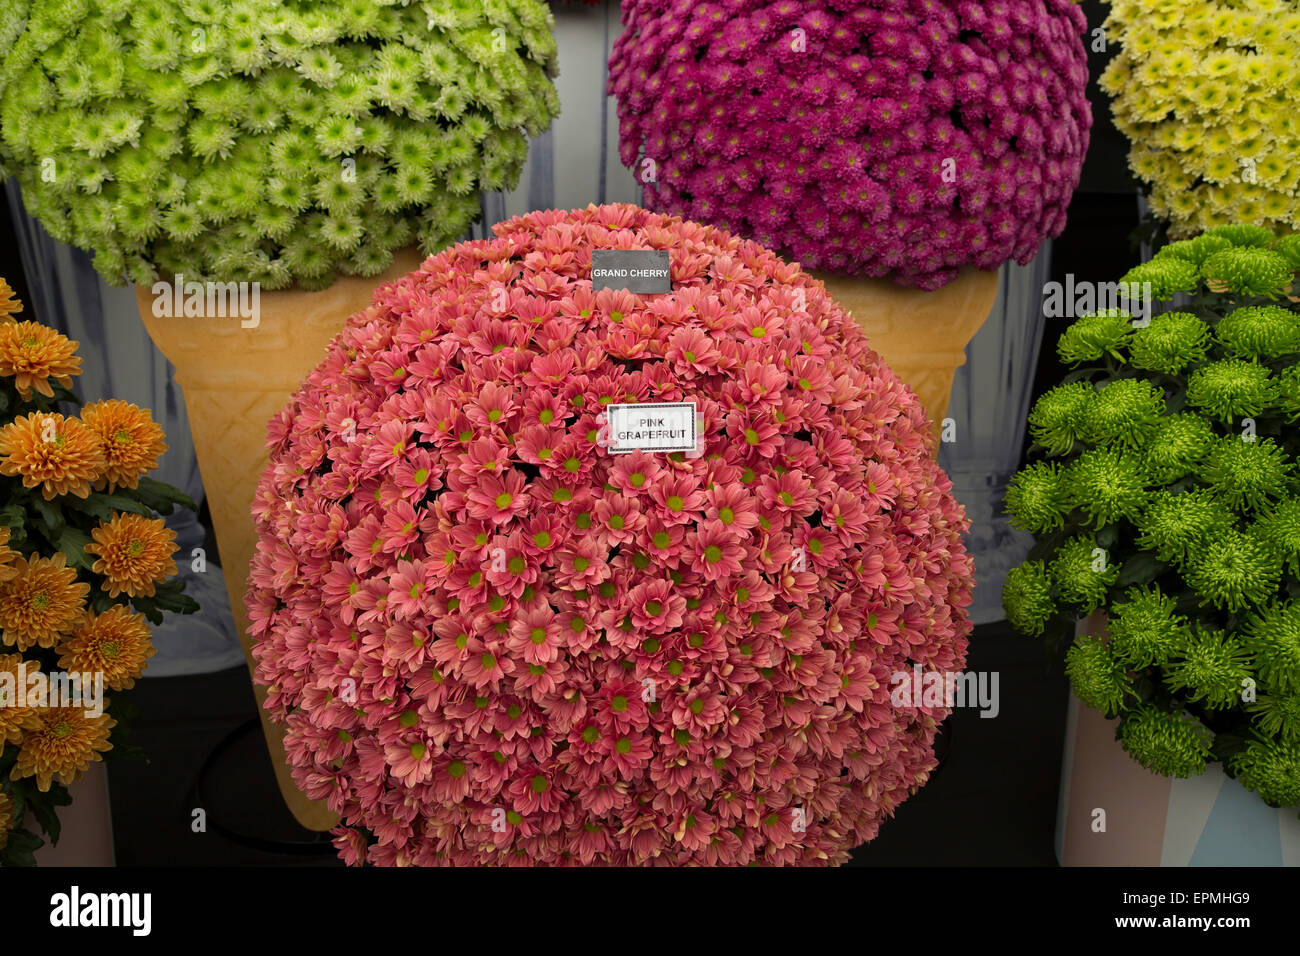 Pink grapefruit Chrysanthemums on display at Chelsea Flower Show 2015 Stock Photo